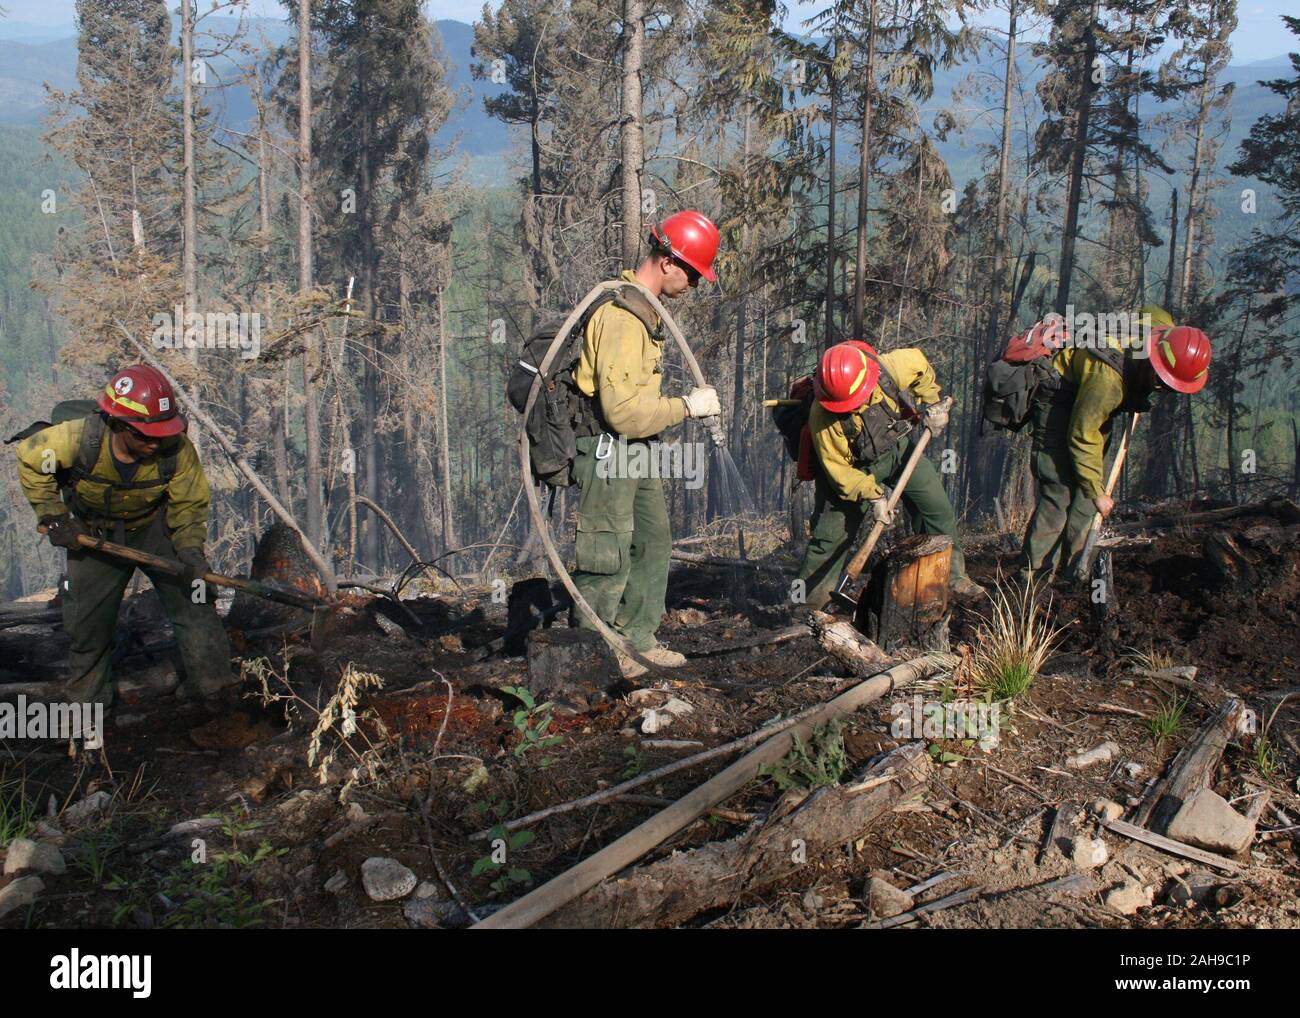 98 firefighters with support from three fire engines, two helicopters, two water tenders, a dozer and an air tanker battled to contain the 90 acre Rogers Fire located on Mt. Rogers five miles west of Aladdin, WA on the Coleville National Forest. Firefighters worked under adverse conditions with steep terrain, heavy timber and gusting winds to reduce the loss of timber and protect the Rogers Mountain Trail. The Rogers Fire began on Aug. 9, 2011 and was controlled by Aug. 19, 2011 with mop up crews ensuring that no flare-ups occurred.  Colville National Forest has 1.1 million acres in northeaste Stock Photo